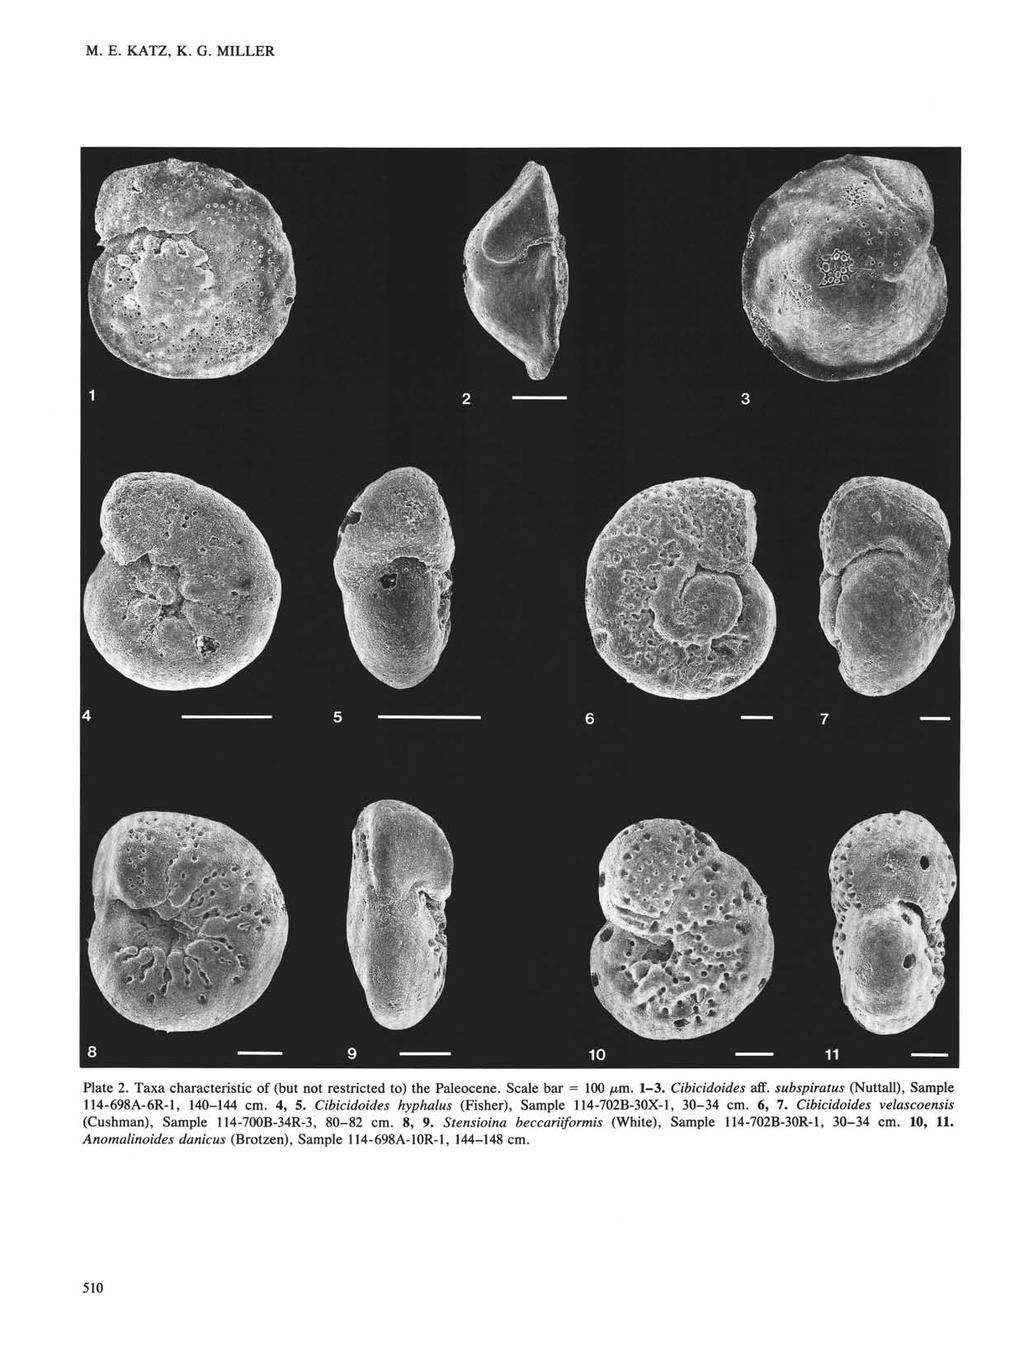 M. E. KATZ, K. G. MILLER Plate 2. Taxa characteristic of (but not restricted to) the Paleocene. Scale bar = 100 µm. 1-3. Cibicidoides aff. subspiratus (Nuttall), Sample 114-698A-6R-1, 140-144 cm.